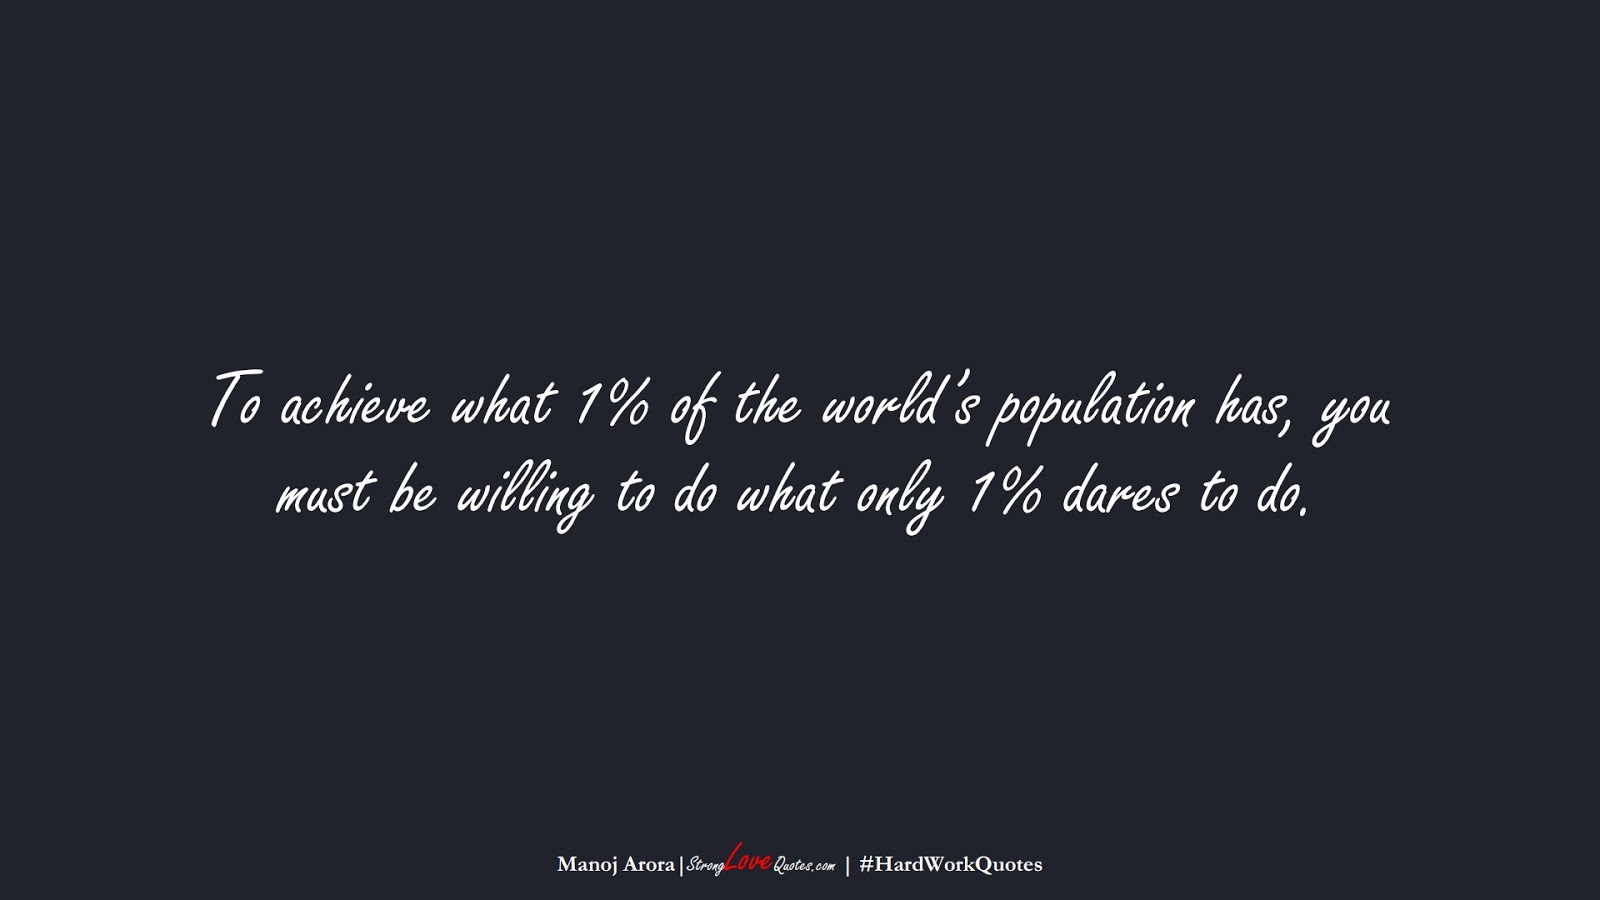 To achieve what 1% of the world’s population has, you must be willing to do what only 1% dares to do. (Manoj Arora);  #HardWorkQuotes